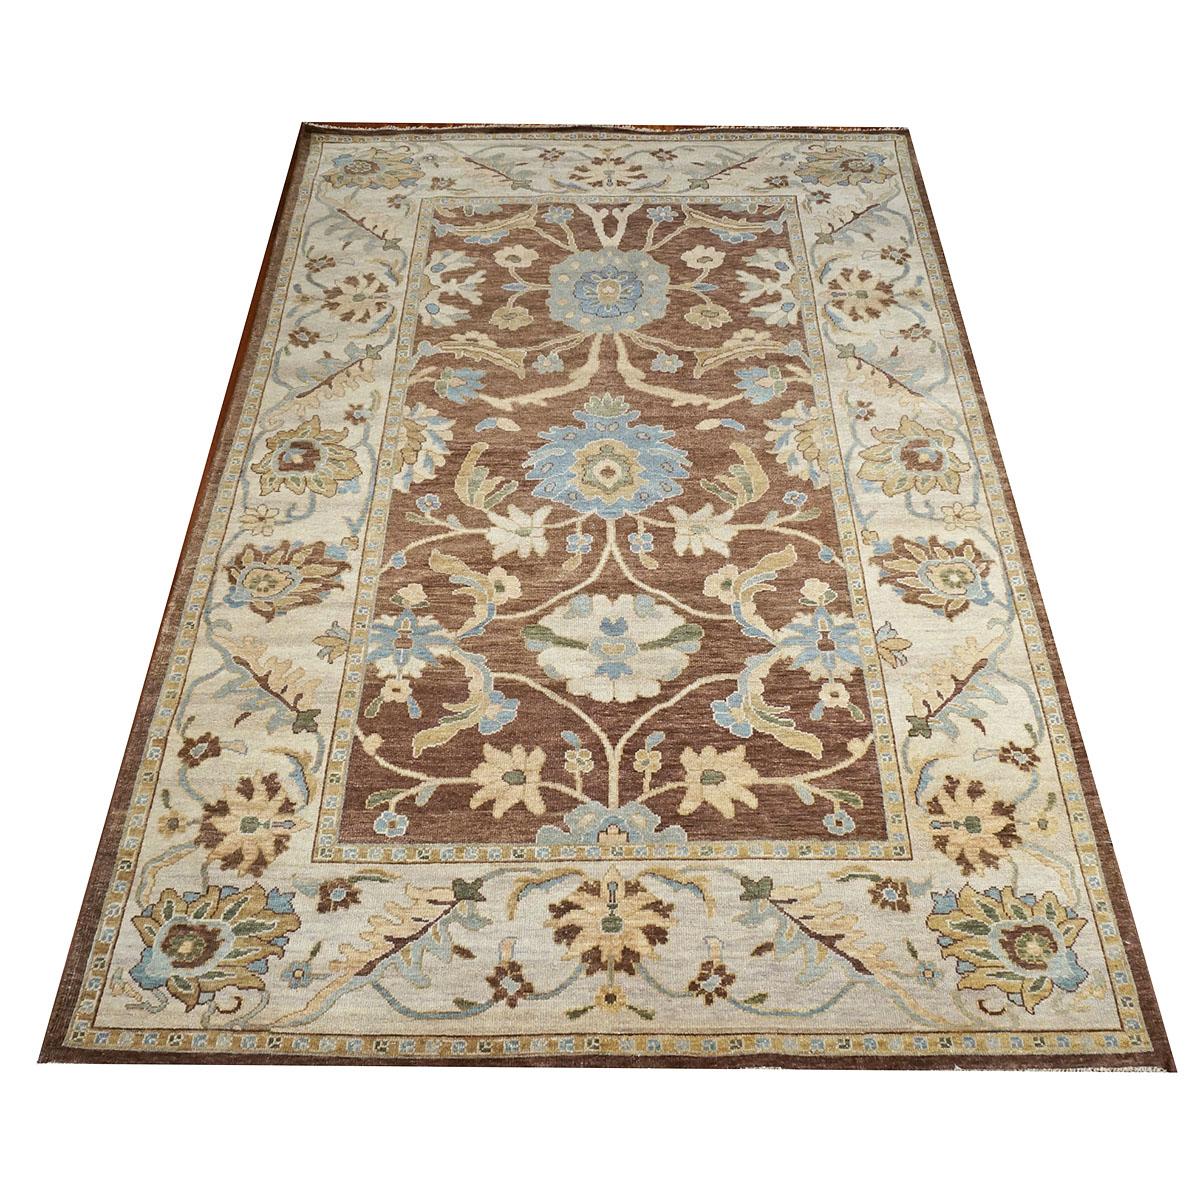 Ashly Fine Rugs presents an antique recreation of an original Afghan Sultanabad 6x9 Handmade Area Rug. Part of our own previous production, this antique recreation was thought of and created in-house and 100% handmade in Afghanistan by master